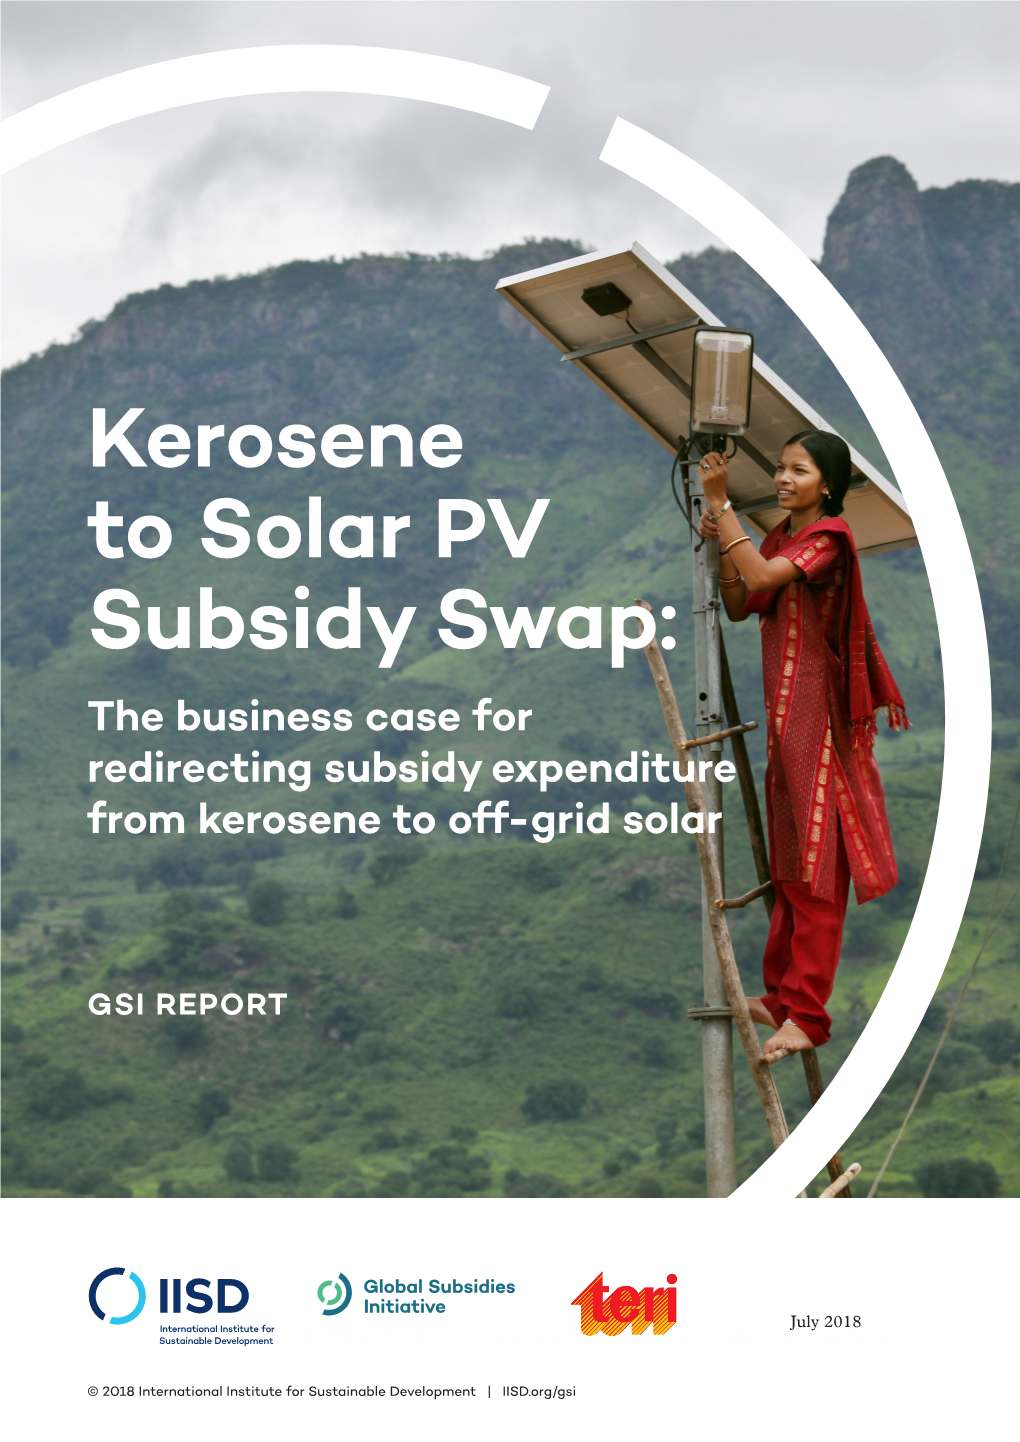 Kerosene to Solar PV Subsidy Swap: the Business Case for Redirecting Subsidy Expenditure from Kerosene to Off-Grid Solar